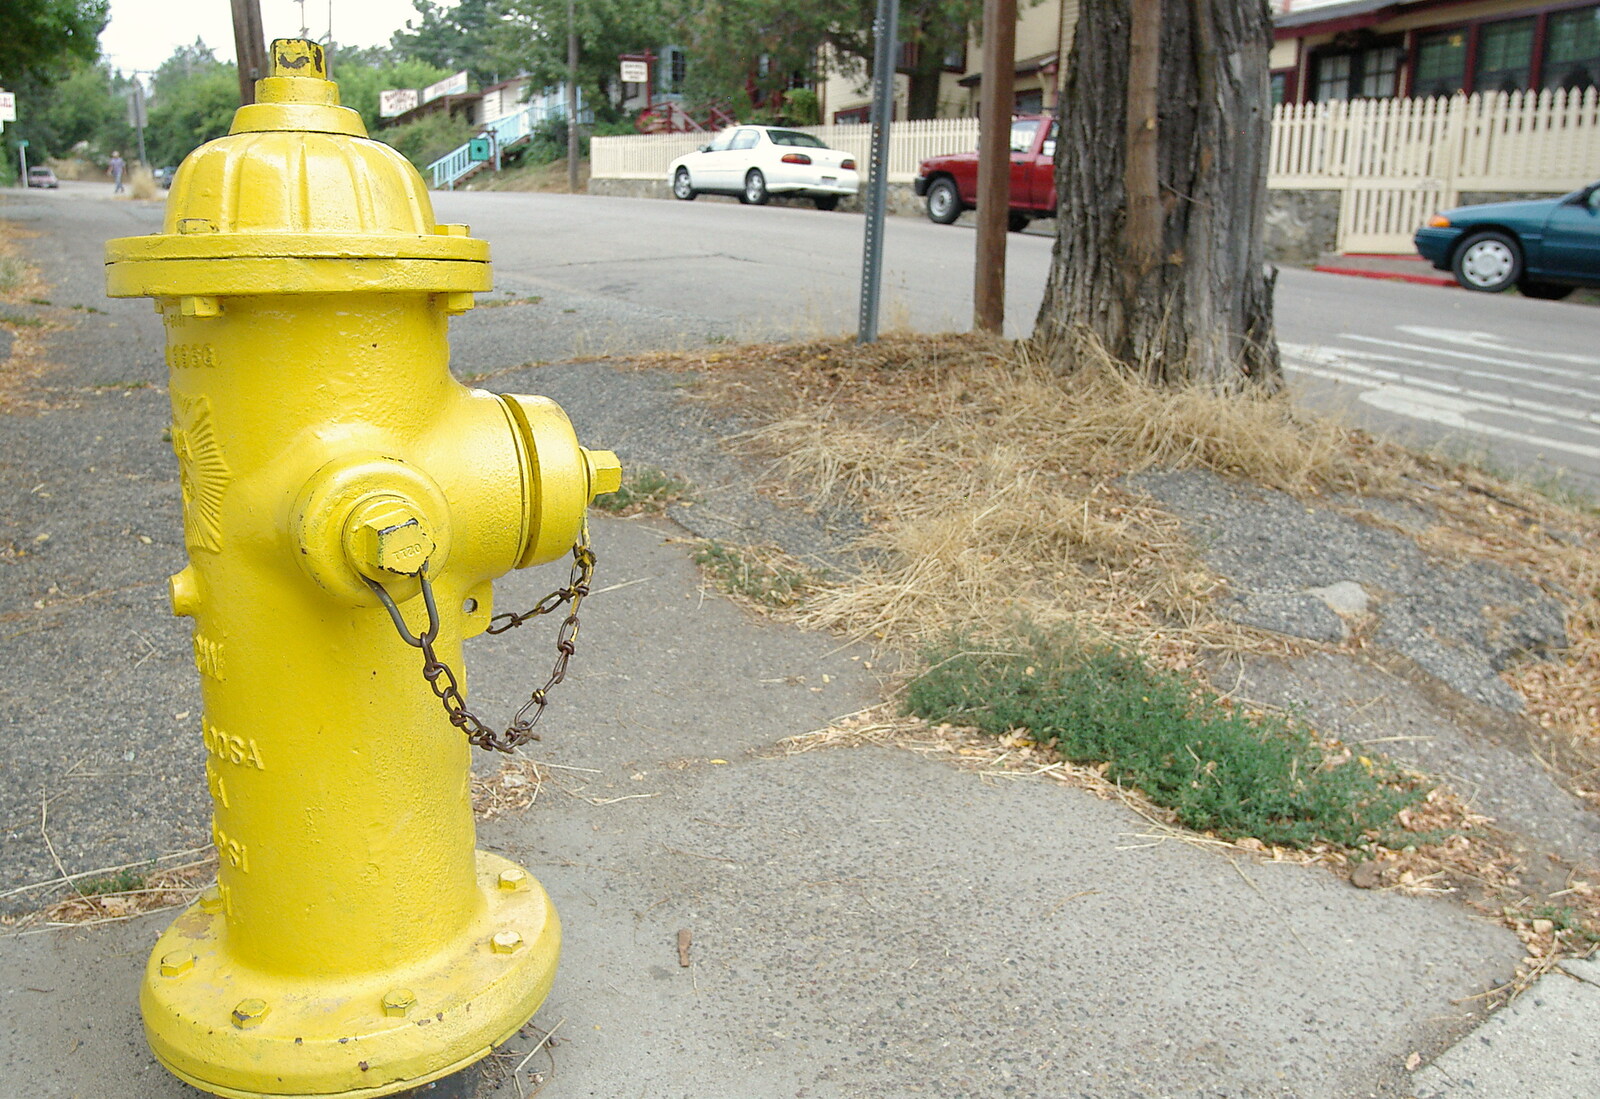 A classic yellow fire hydrant from Route 78: A Drive Around the San Diego Mountains, California, US - 9th August 2005